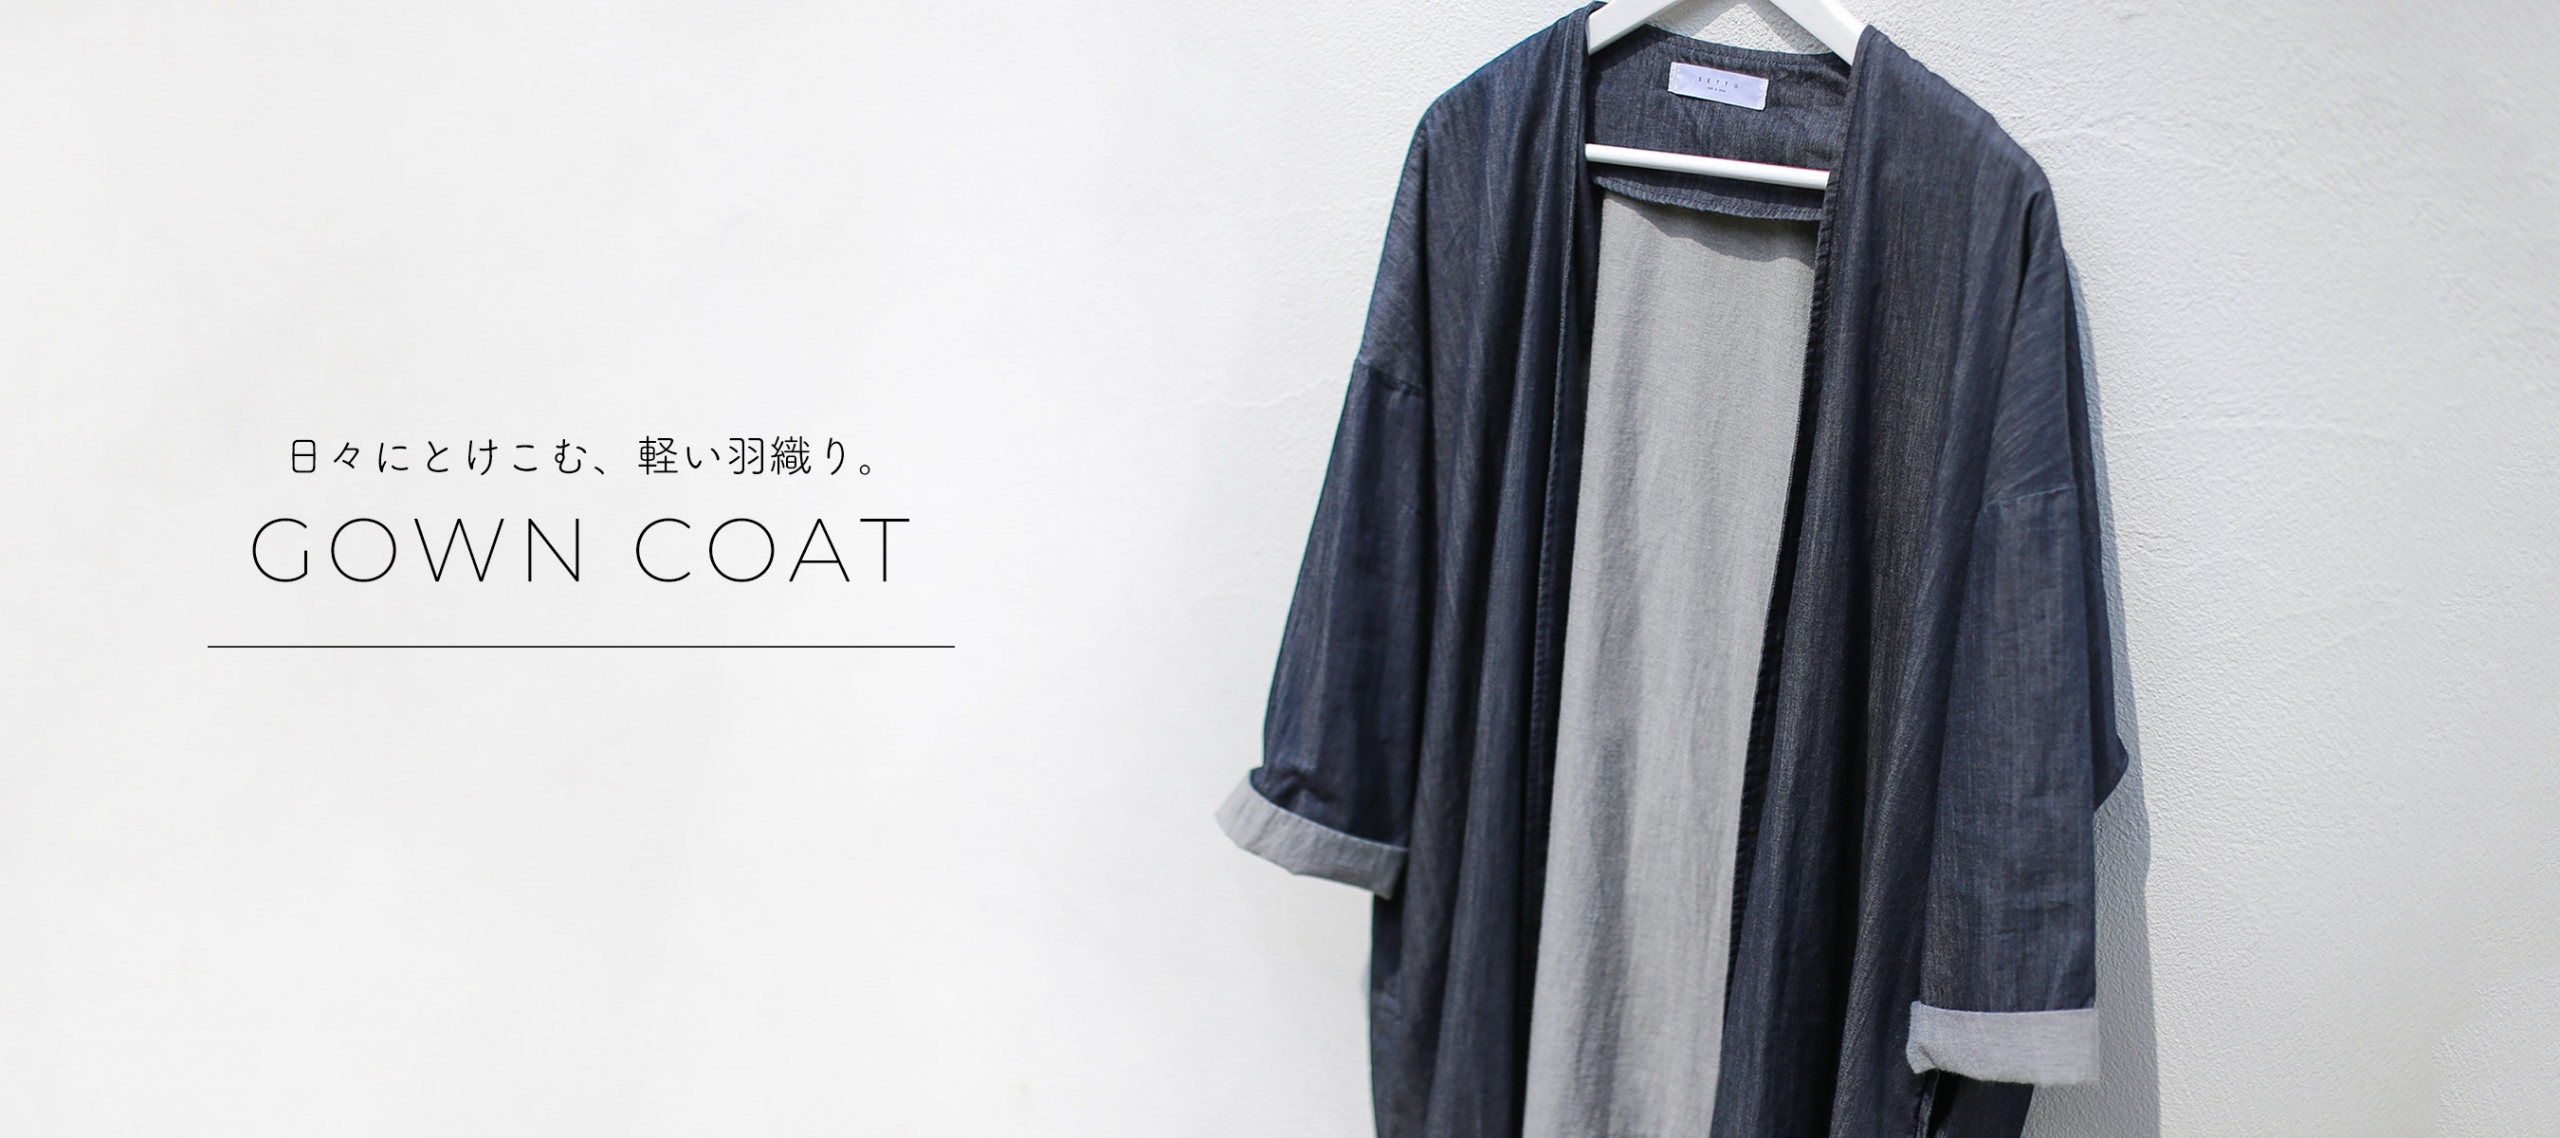 PC-st-gown-coat-banner